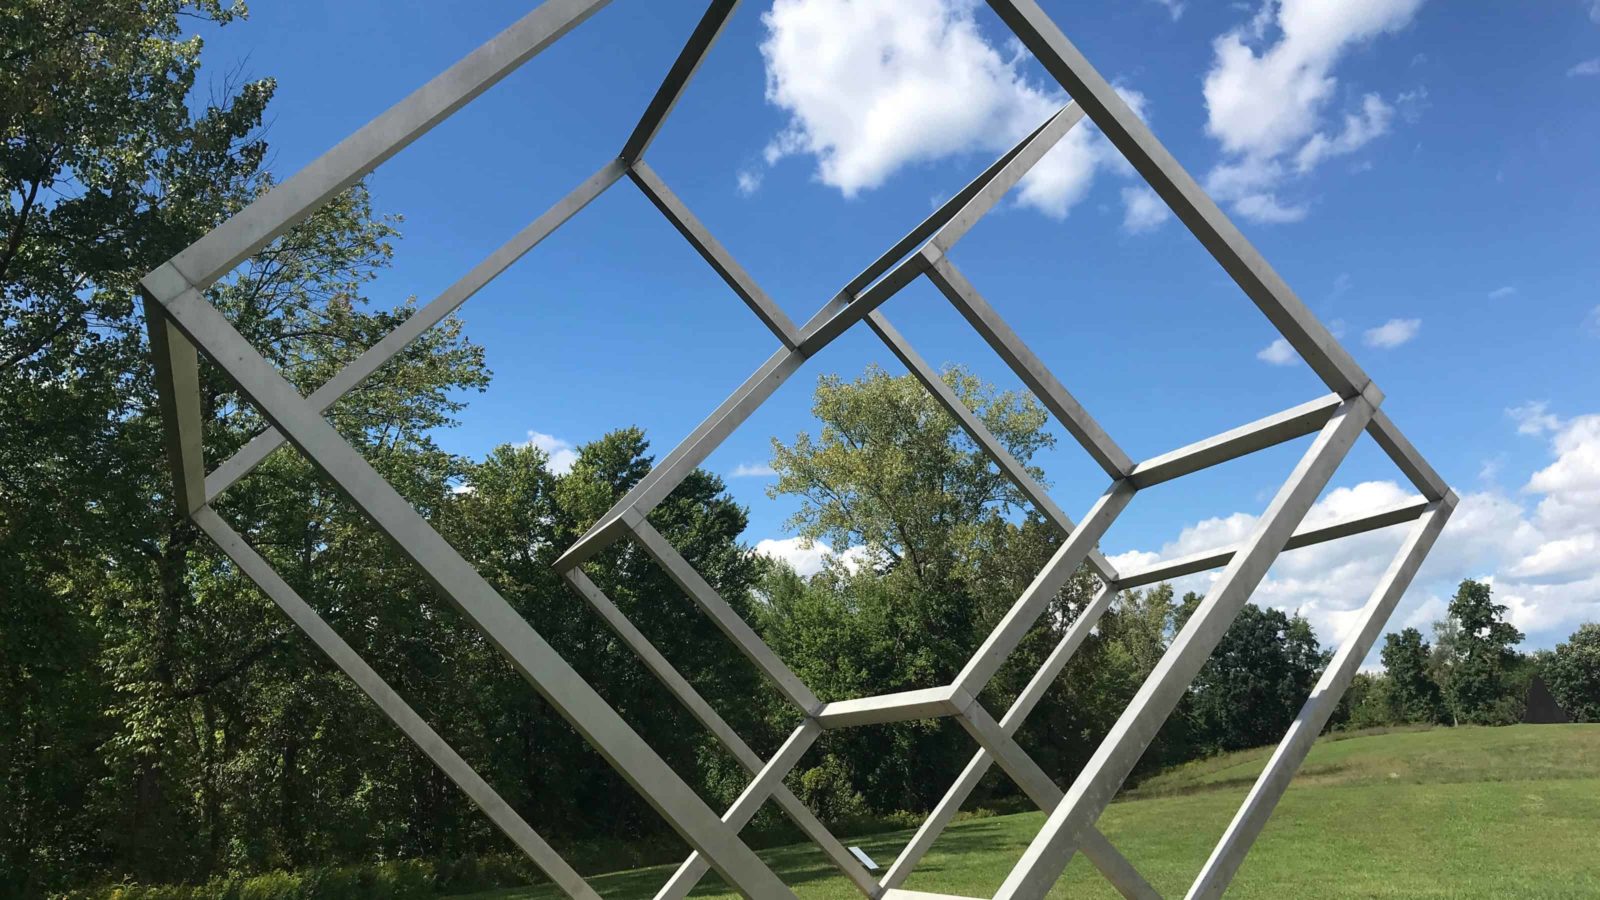 Forrest Myers' Valledor 1969 frames the fields at Art OMI in Ghent, N.Y.